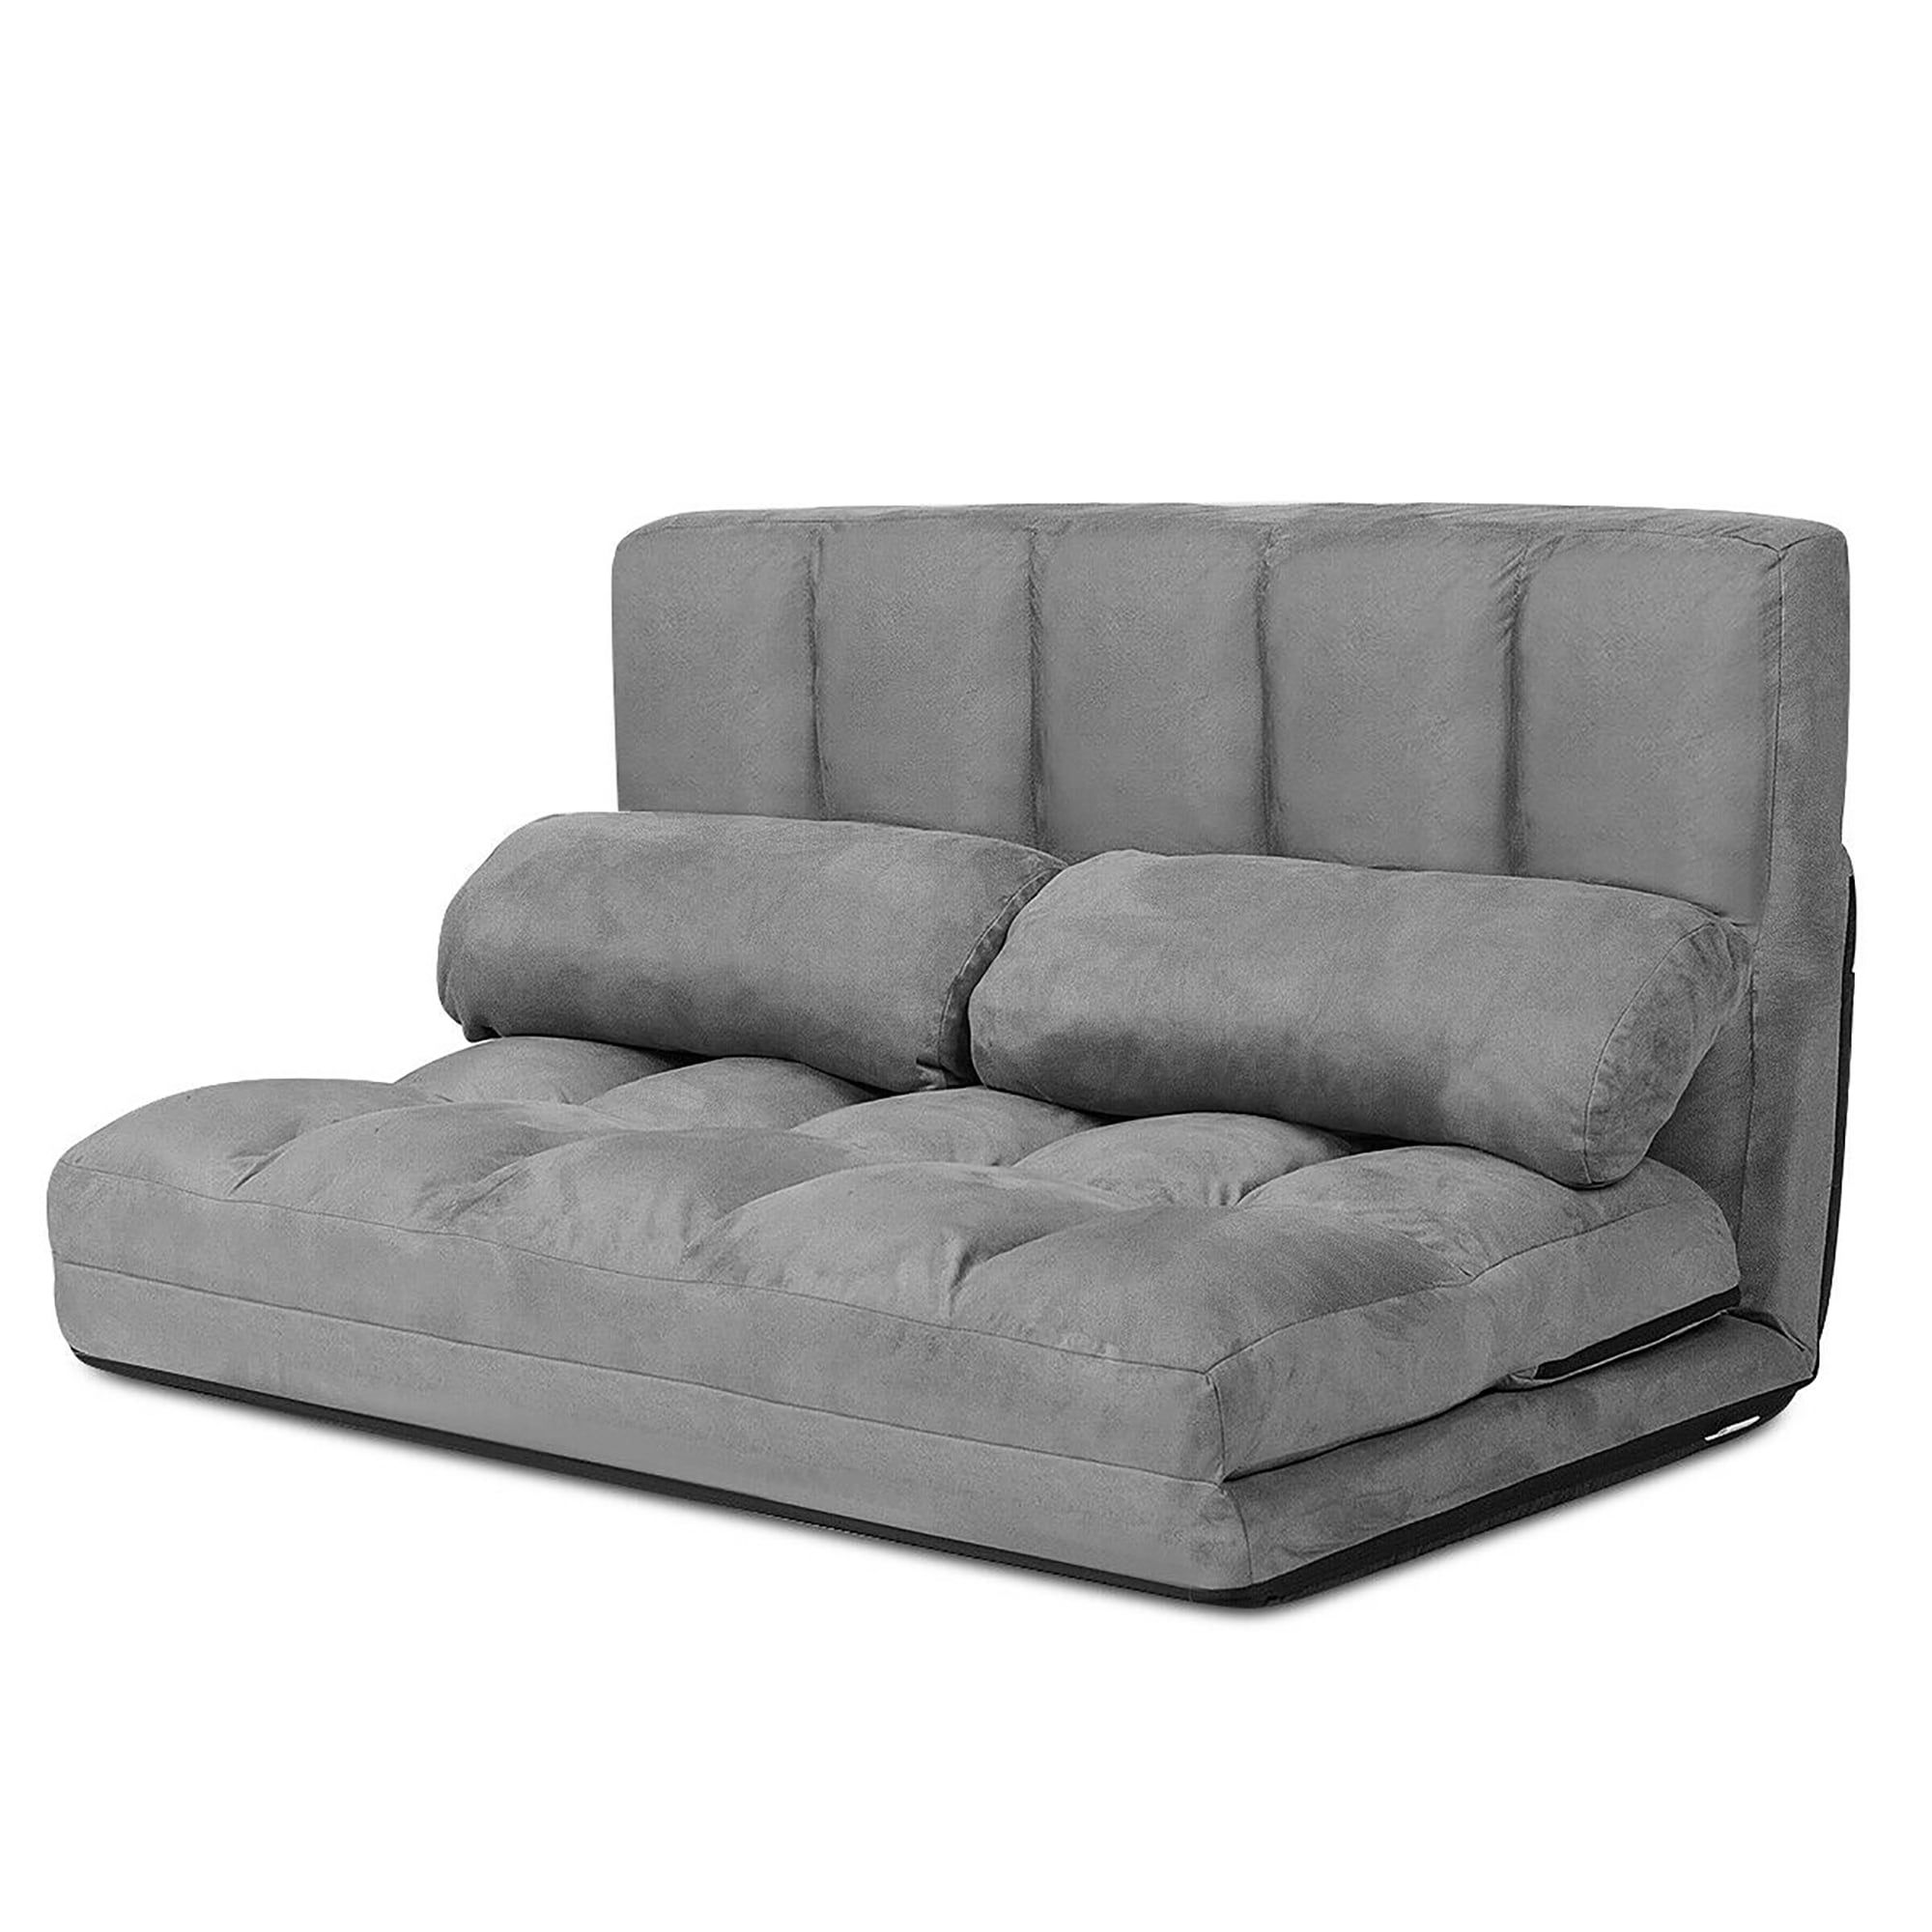 Costway Foldable Floor Sofa Bed 6 Position Adjustable Lounge Couch With For 2 In 1 Foldable Sofas (Gallery 13 of 20)